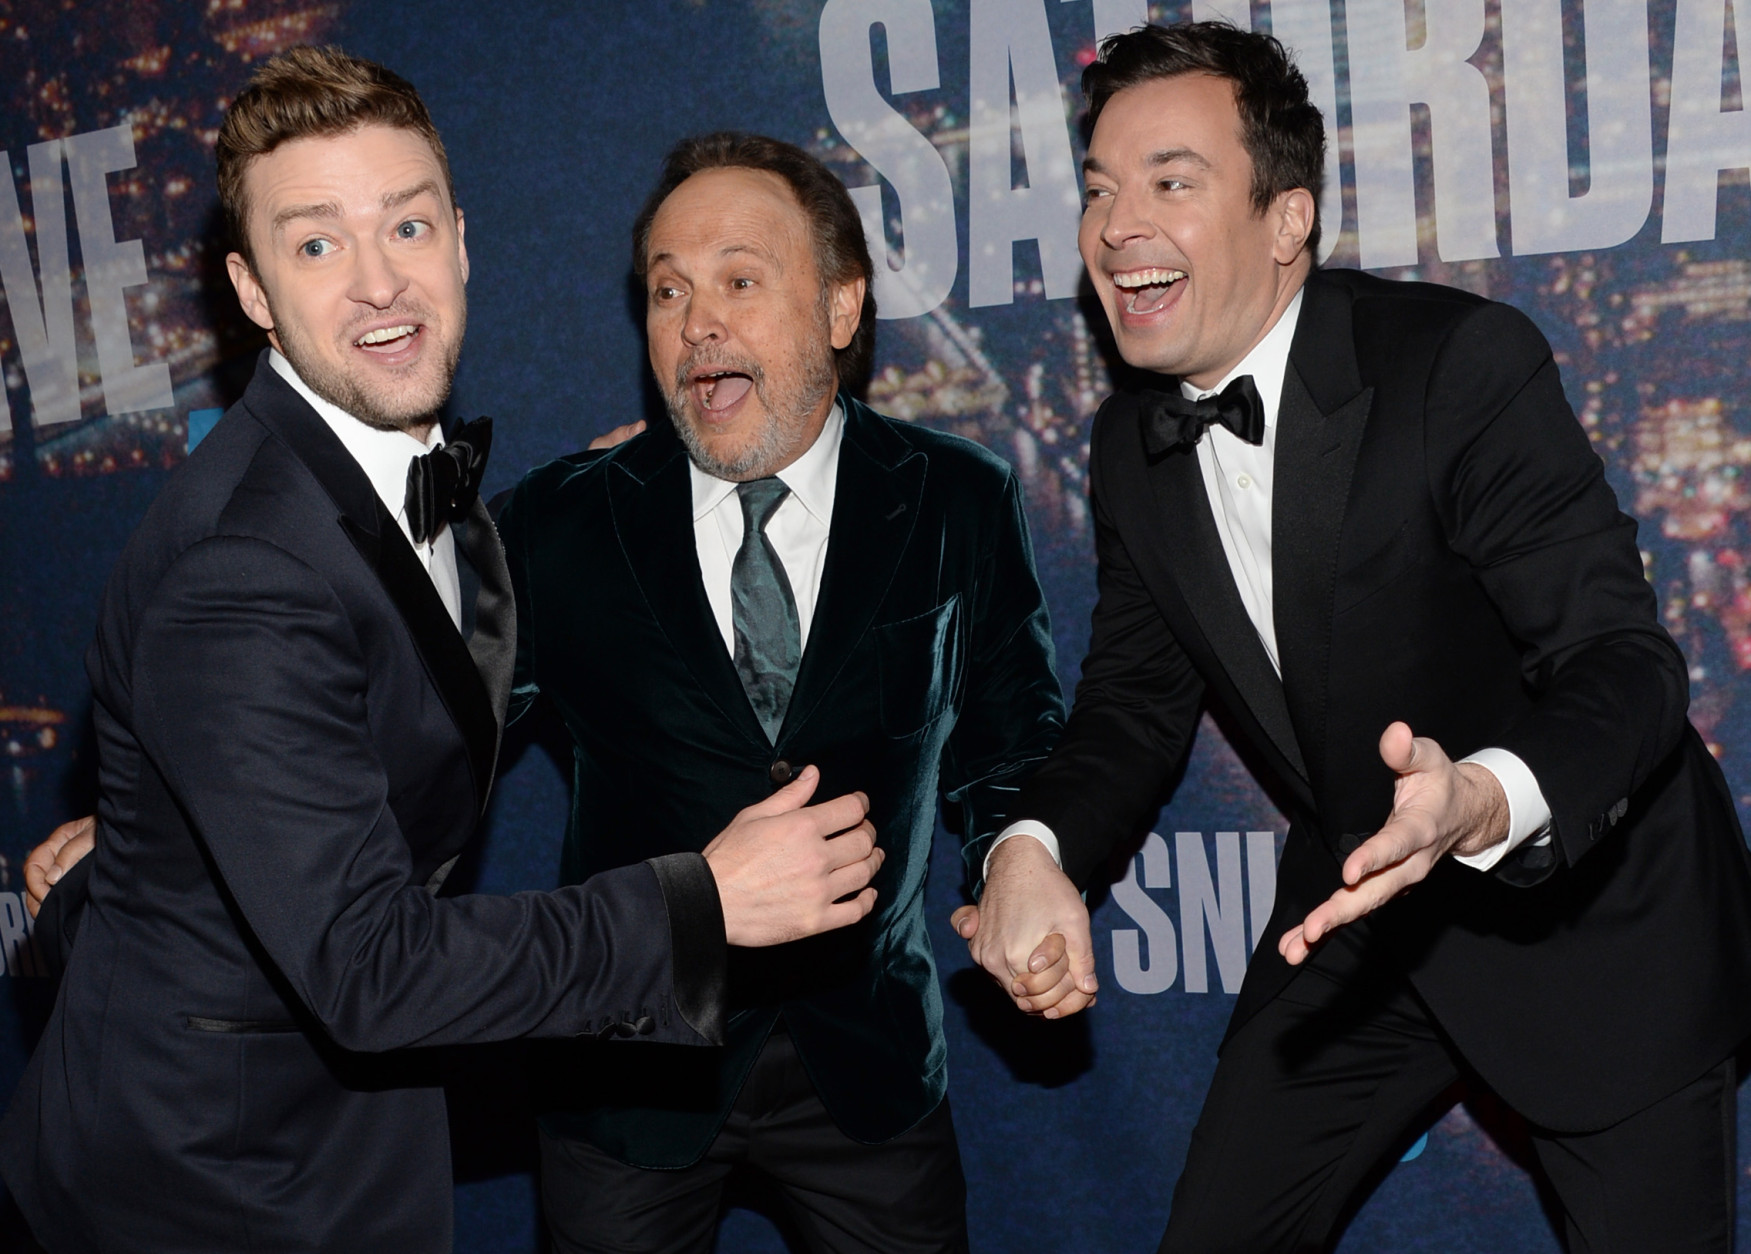 Justin Timberlake, from left, Billy Crystal and Jimmy Fallon arrive at the Saturday Night Live 40th Anniversary Special at Rockefeller Plaza on Sunday, Feb. 15, 2015, in New York. (Photo by Evan Agostini/Invision/AP)